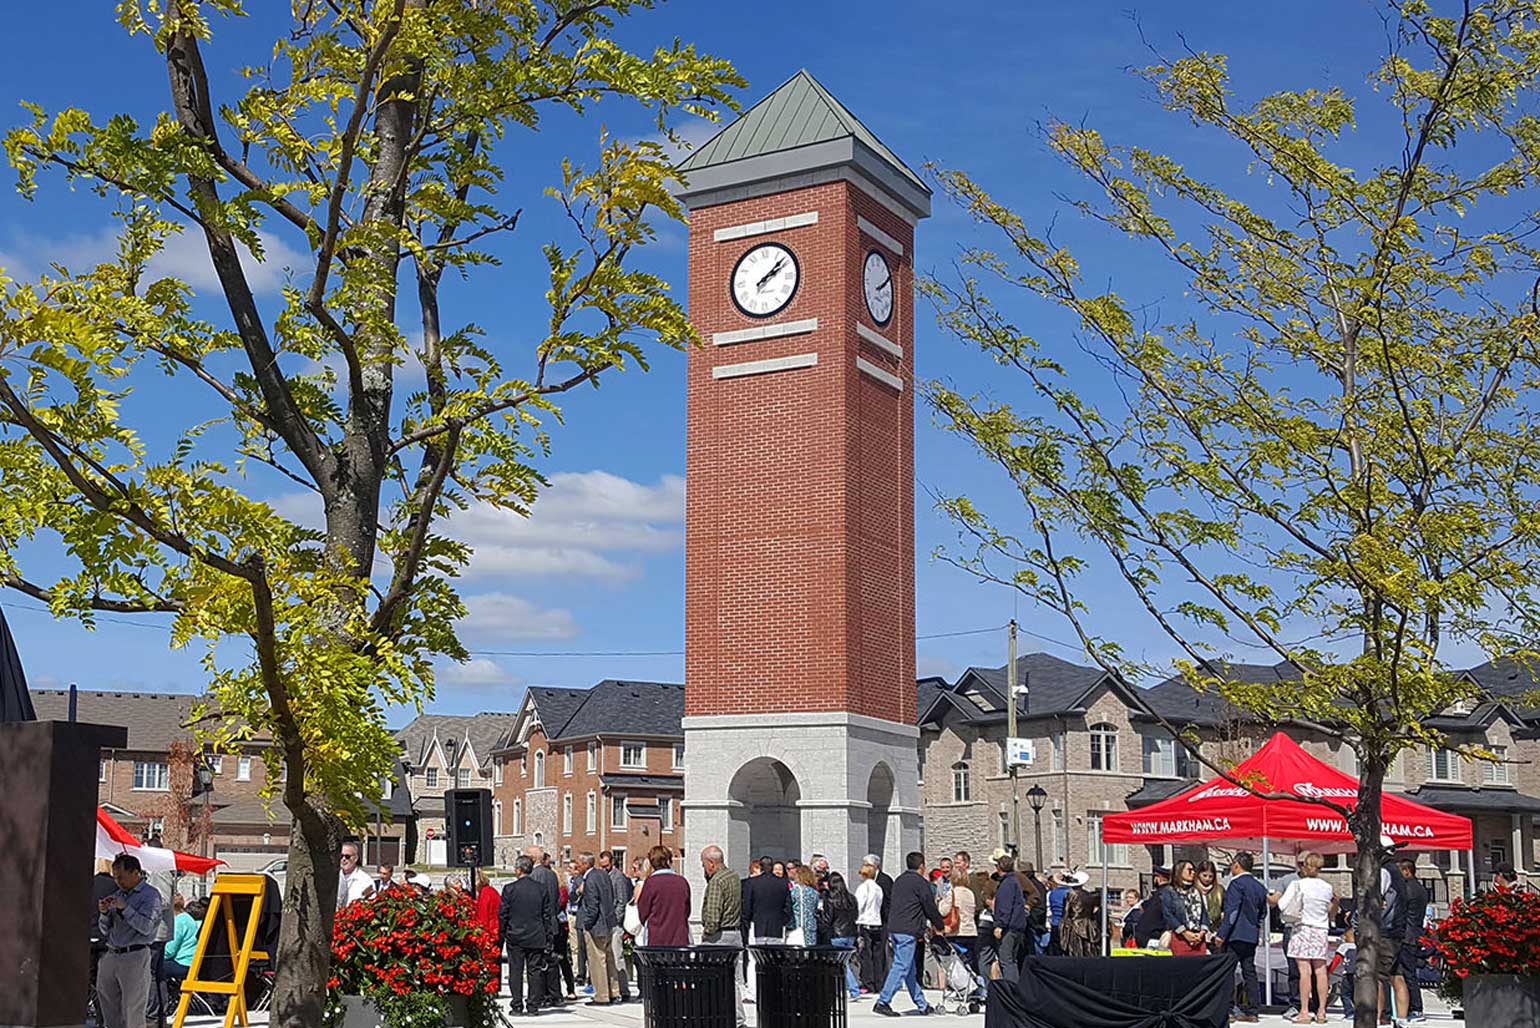 Berczy Square Clock Tower in Markham, ON, courtesy of The MBTW Group